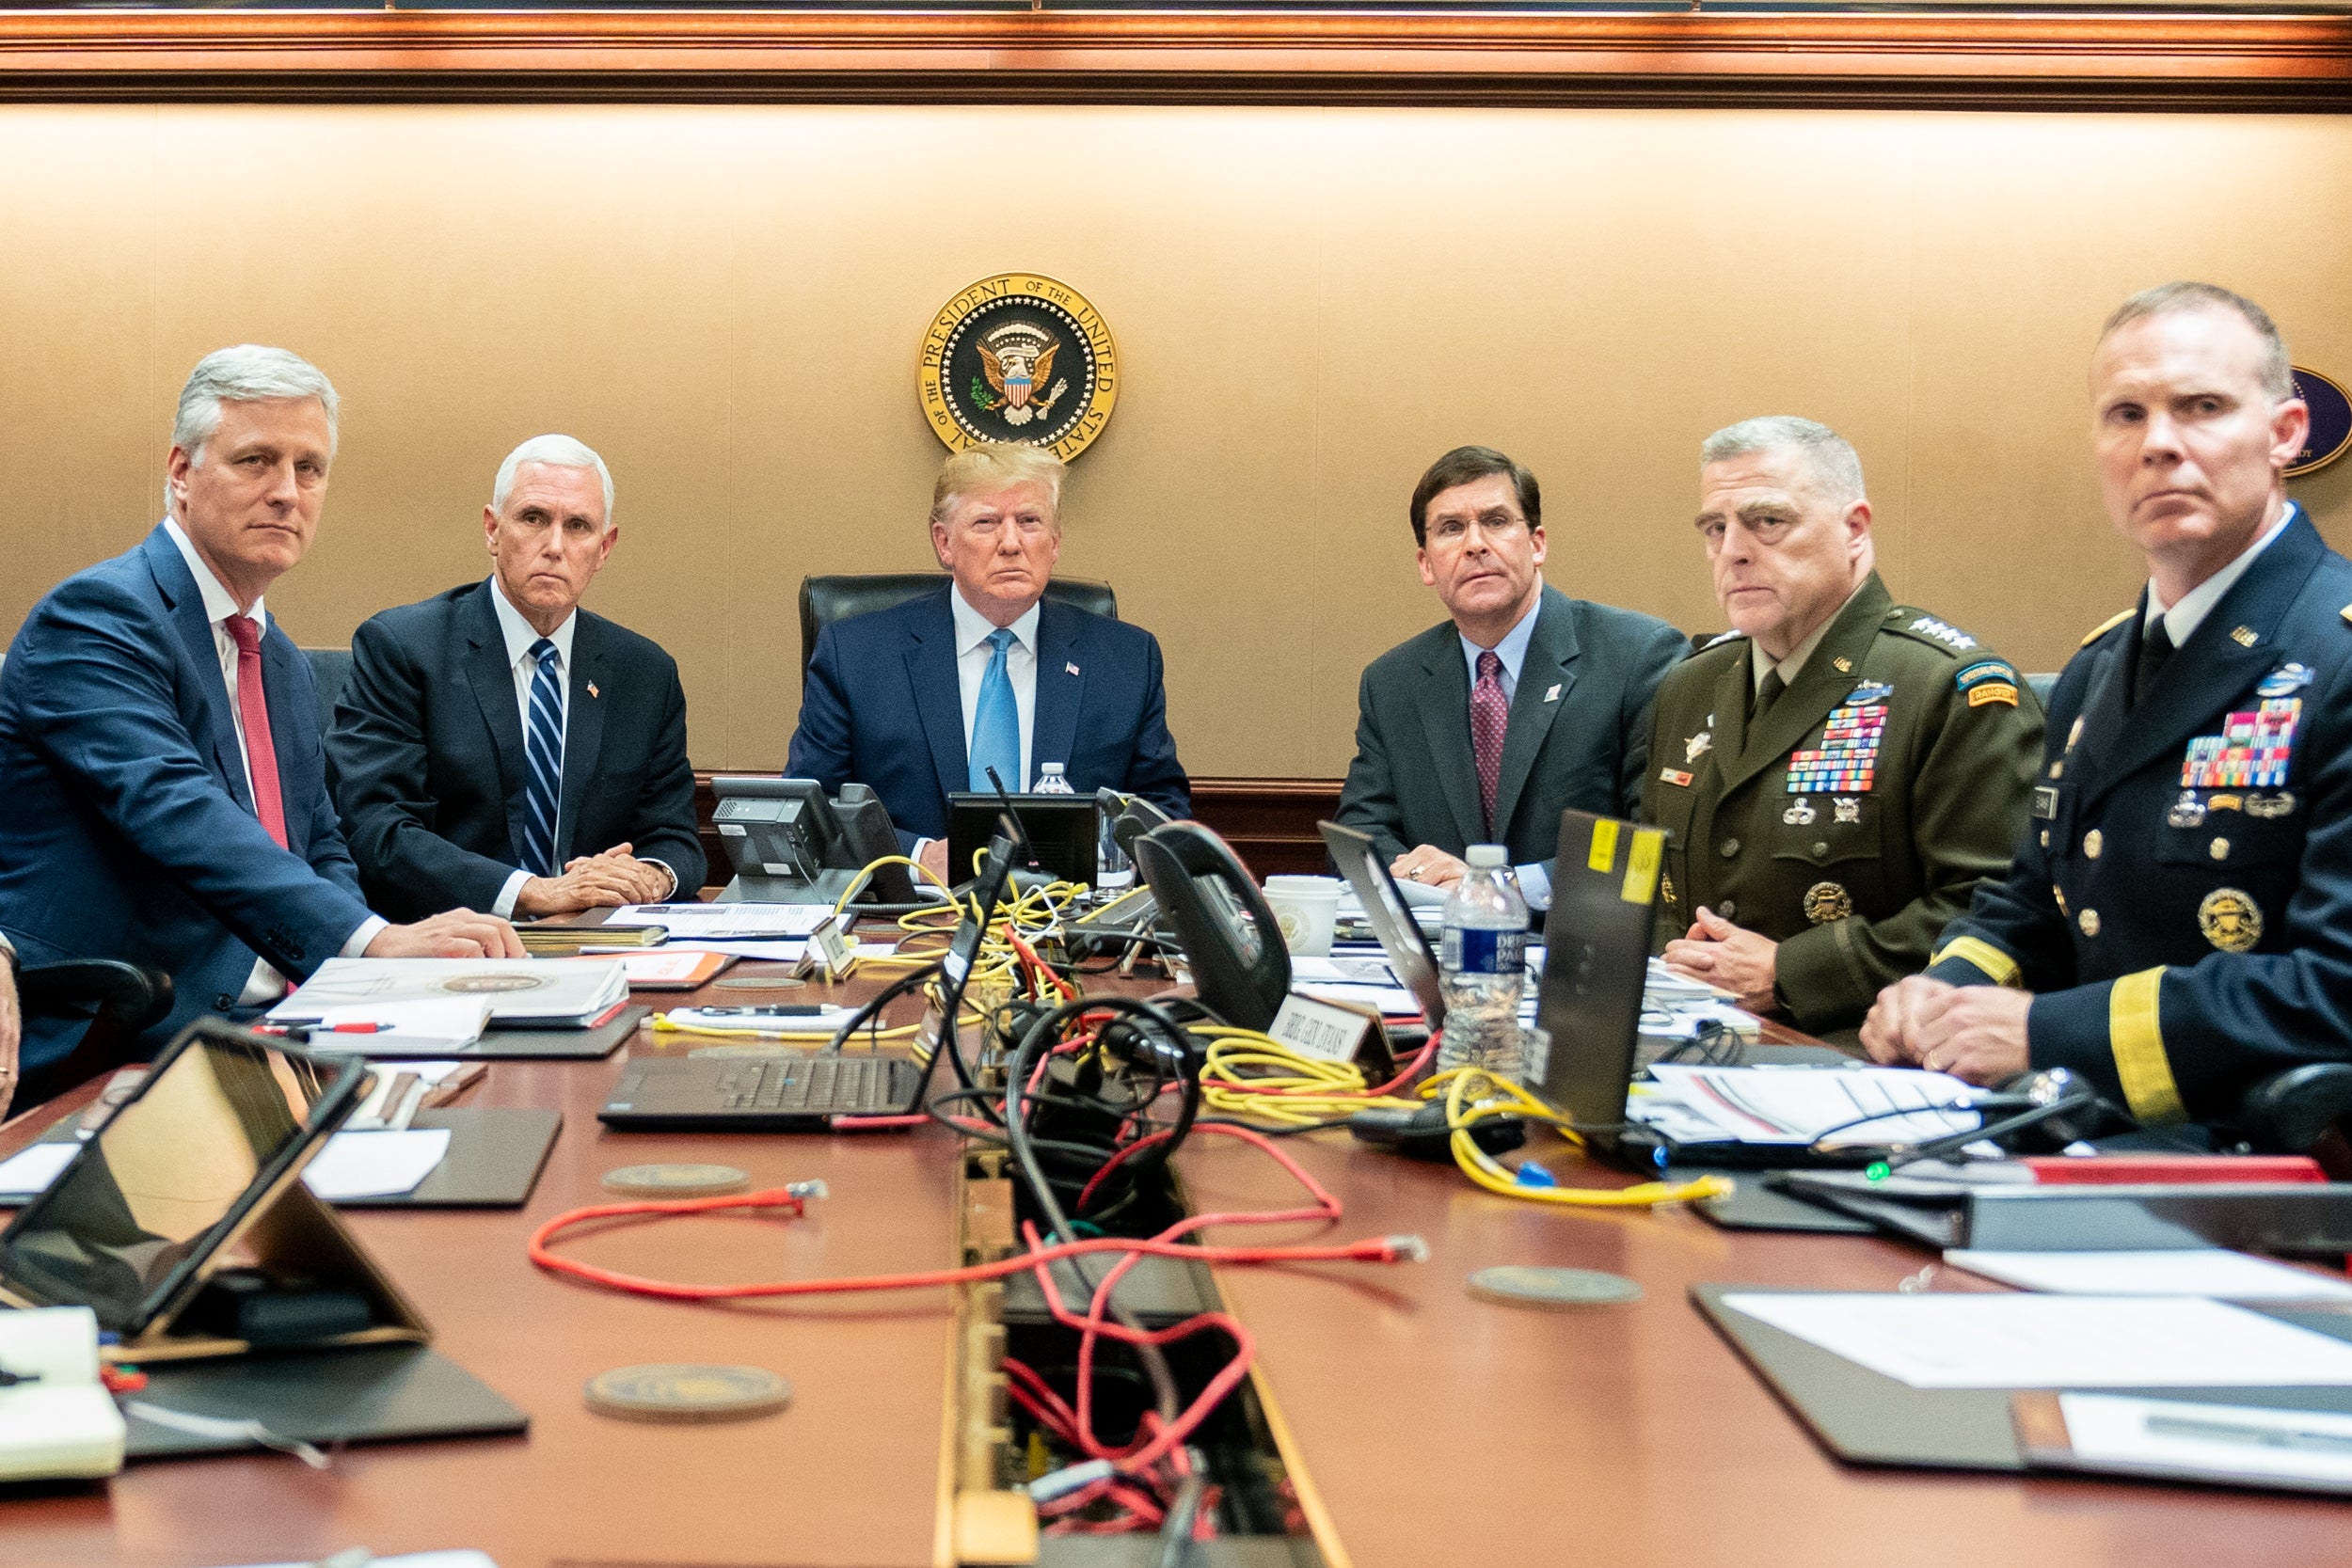 Trump Seemingly Tries To One-Up An Obama Situation Room Photo, Twitter Goes In